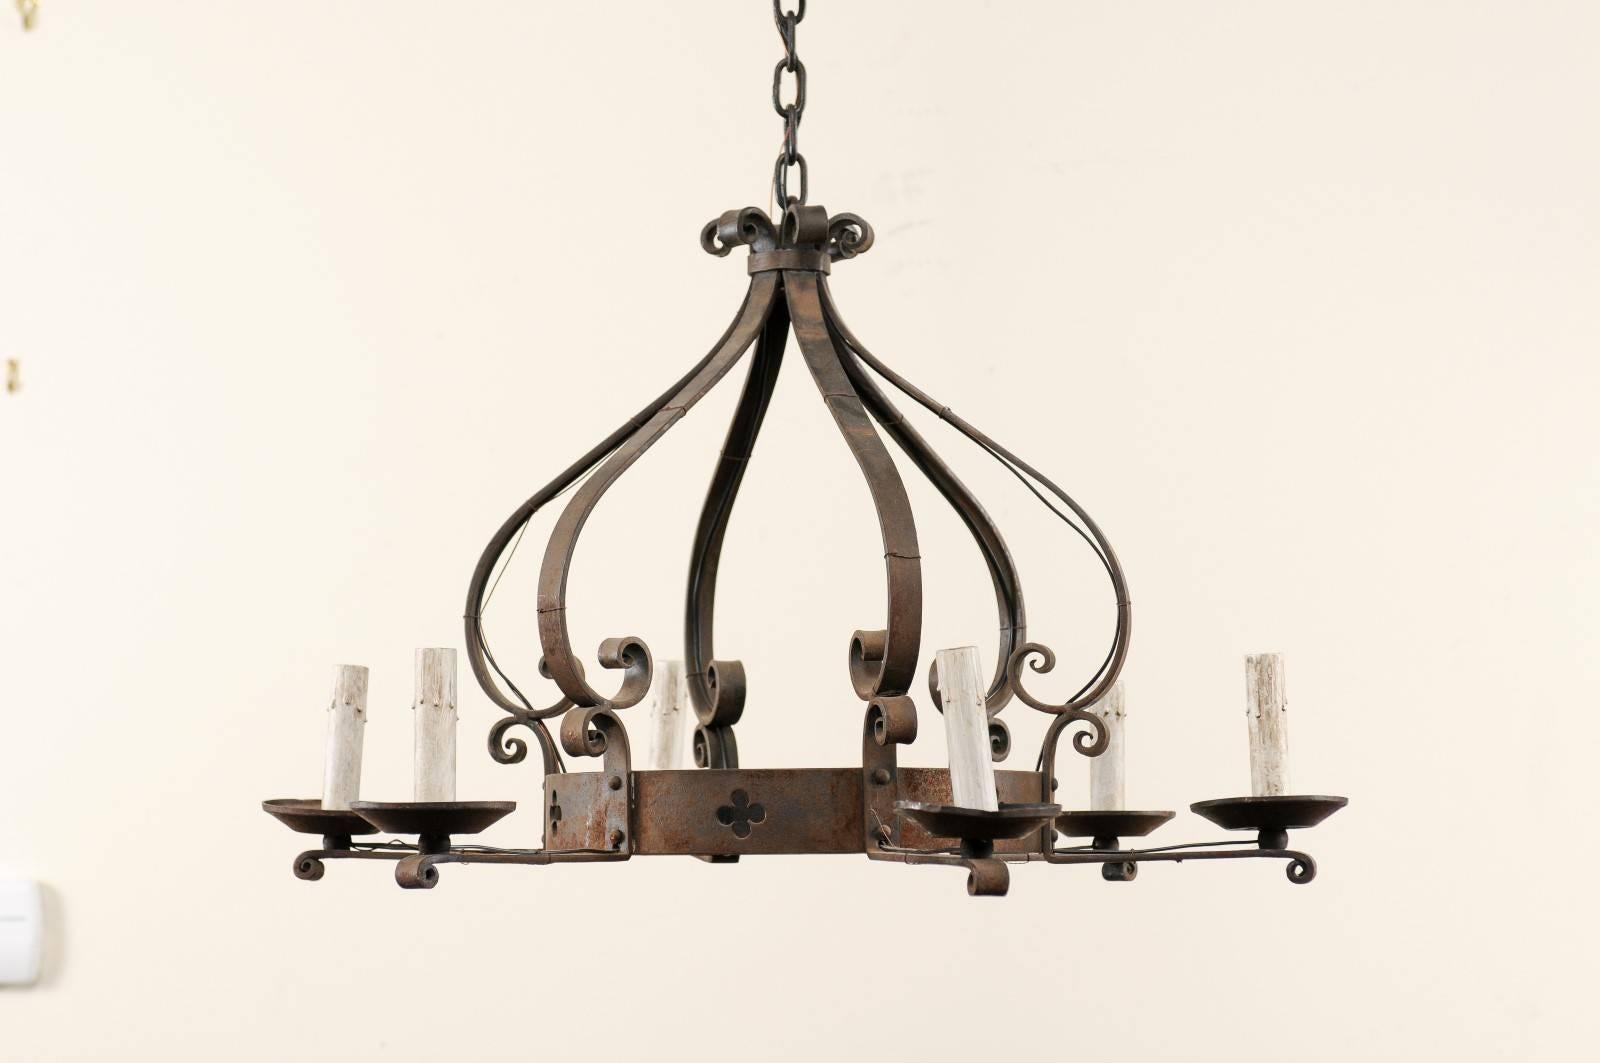 Forged French Vintage Iron Chandelier with Crown Shape & Pierced Clover / Trefoil Decor